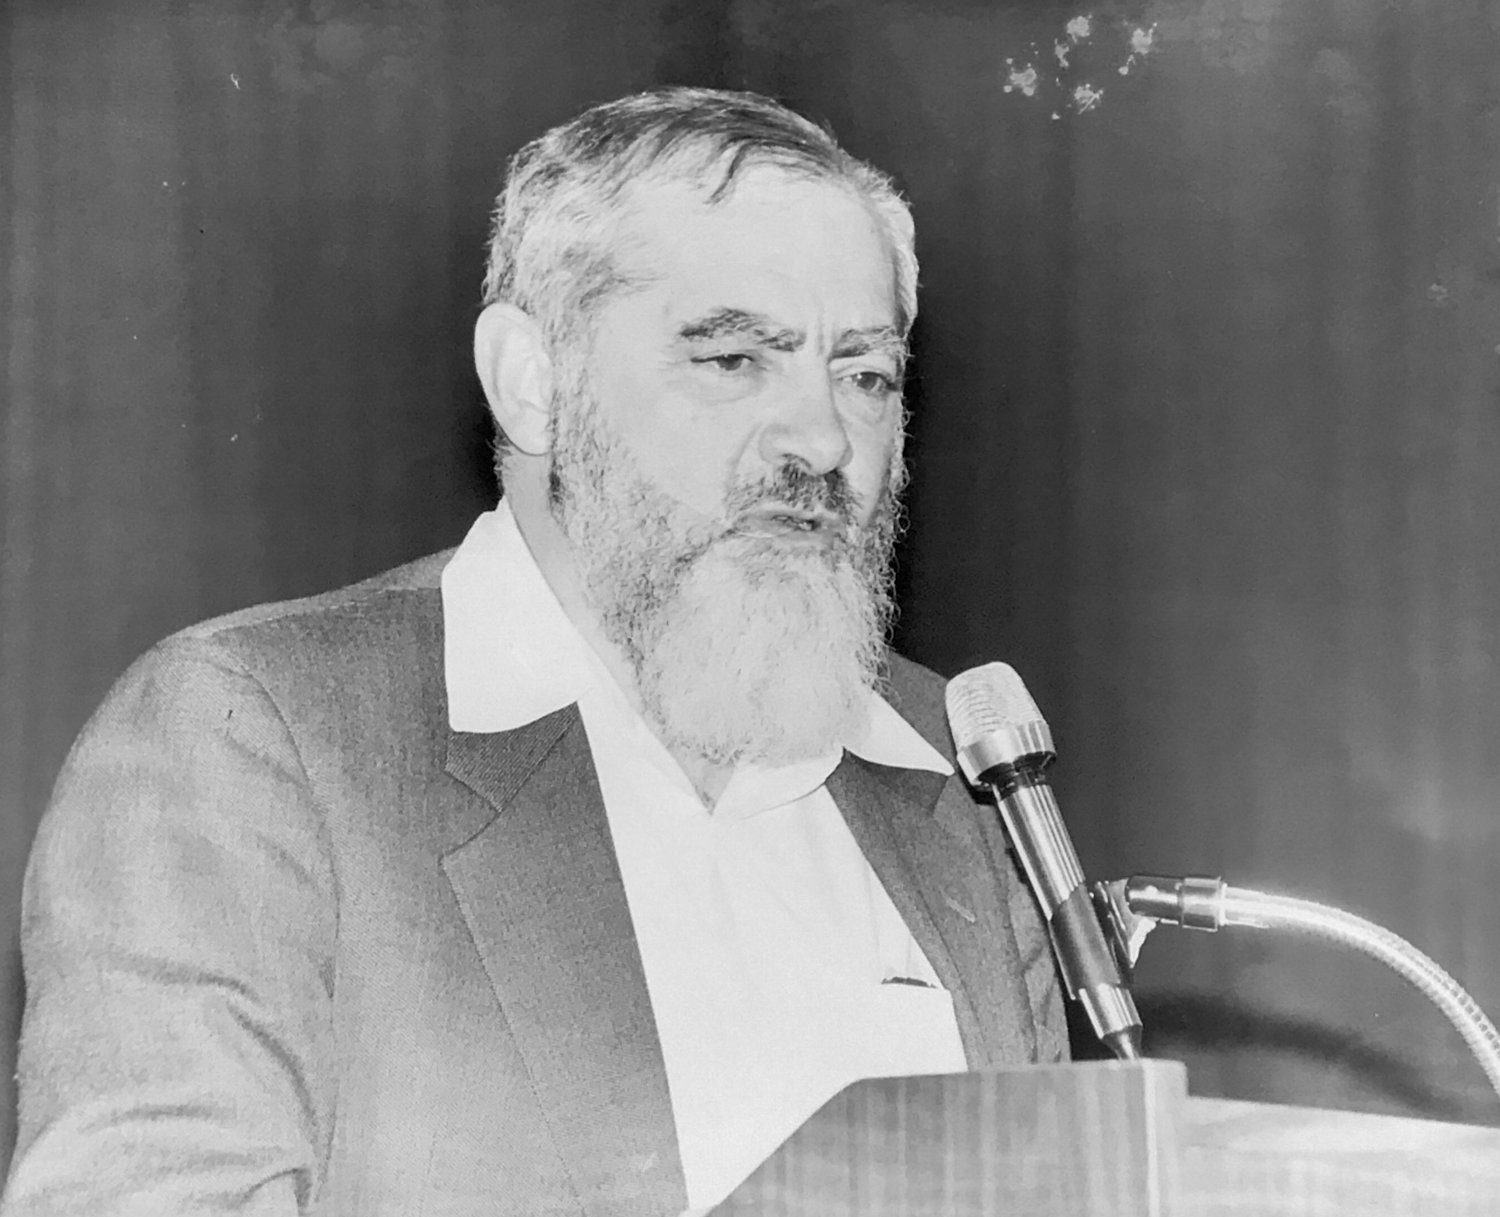 Rabbi Meir Kahane had sharp words for The Riverdale Press and two local rabbis in a speech he gave at The Riverdale Y on Feb. 25, 1990. He expressed what many described as extremist views in a 1984 debate about the future of Israel between him and then-Harvard Law School professor Alan Dershowitz.